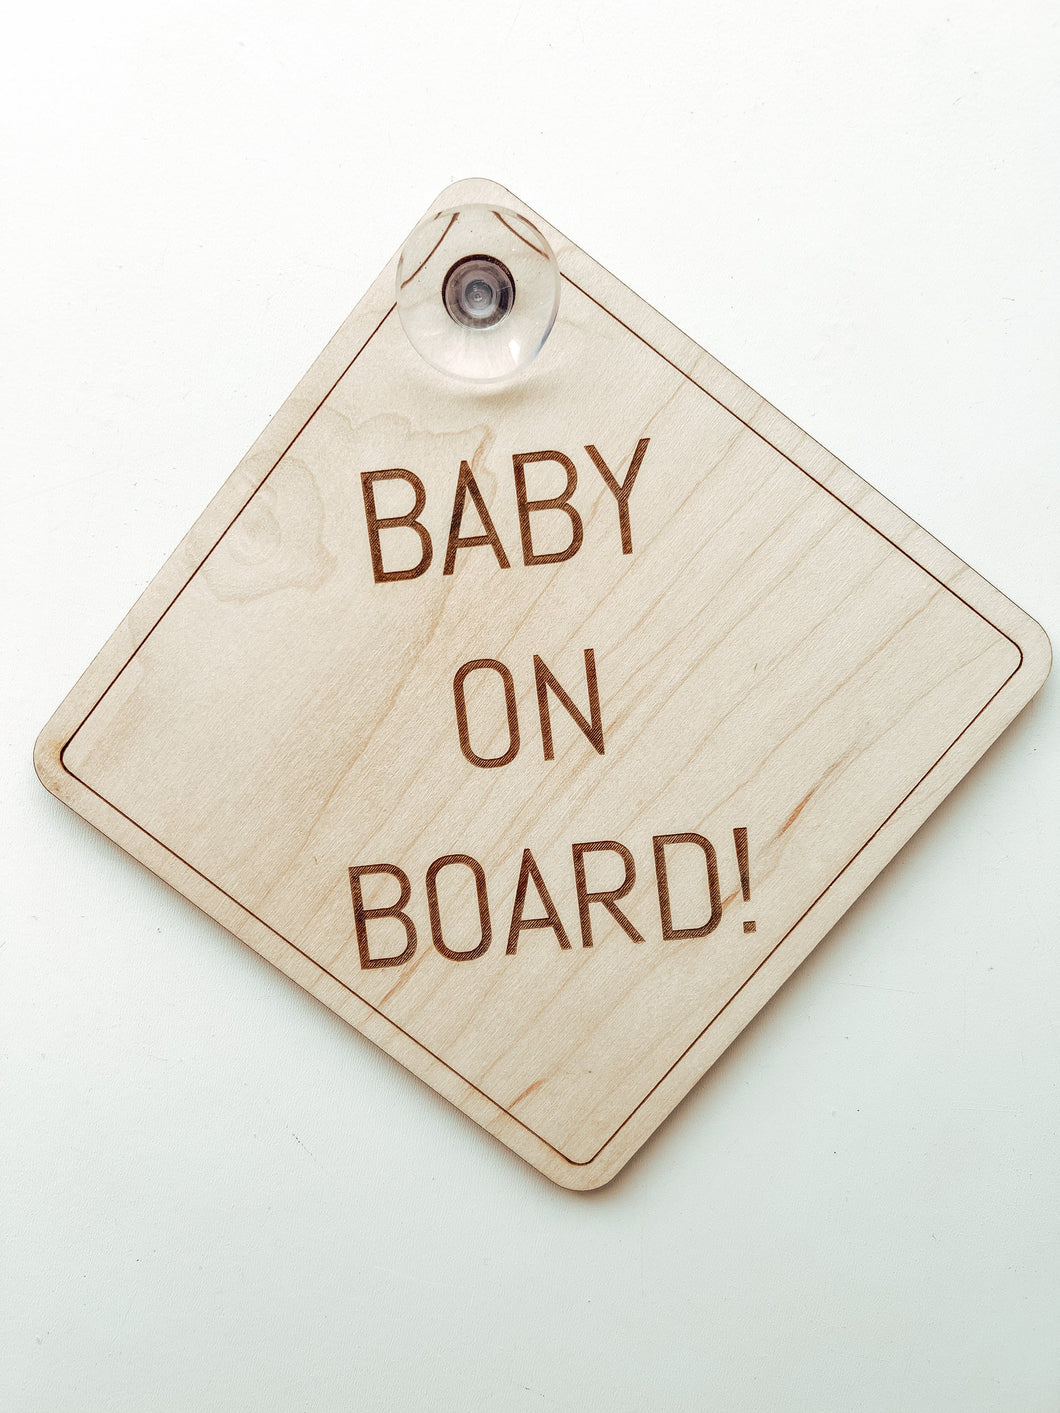 Reversible “on board” sign